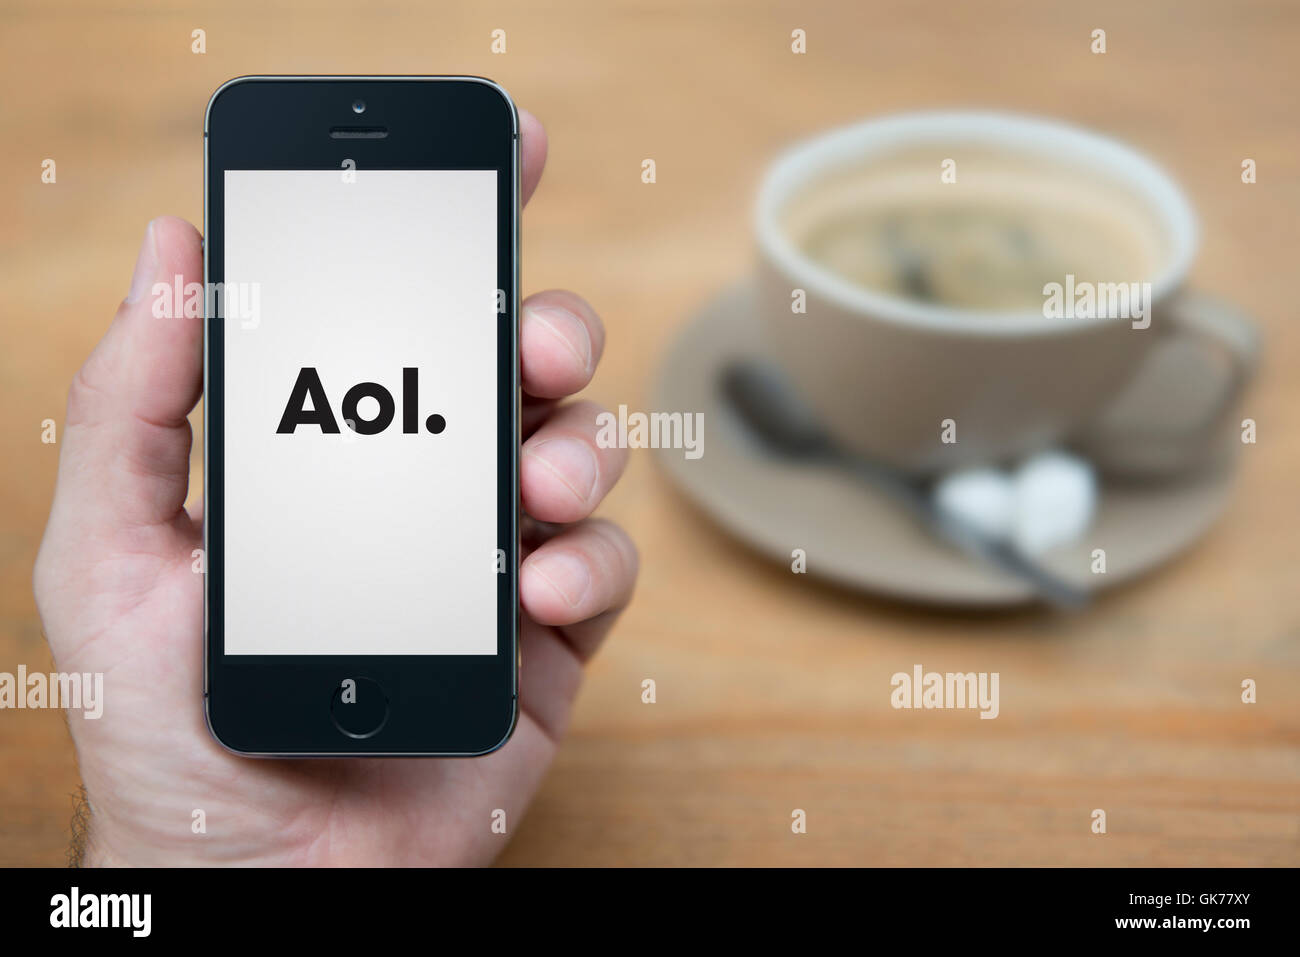 A man looks at his iPhone which displays the Aol logo, while sat with a cup of coffee (Editorial use only). Stock Photo